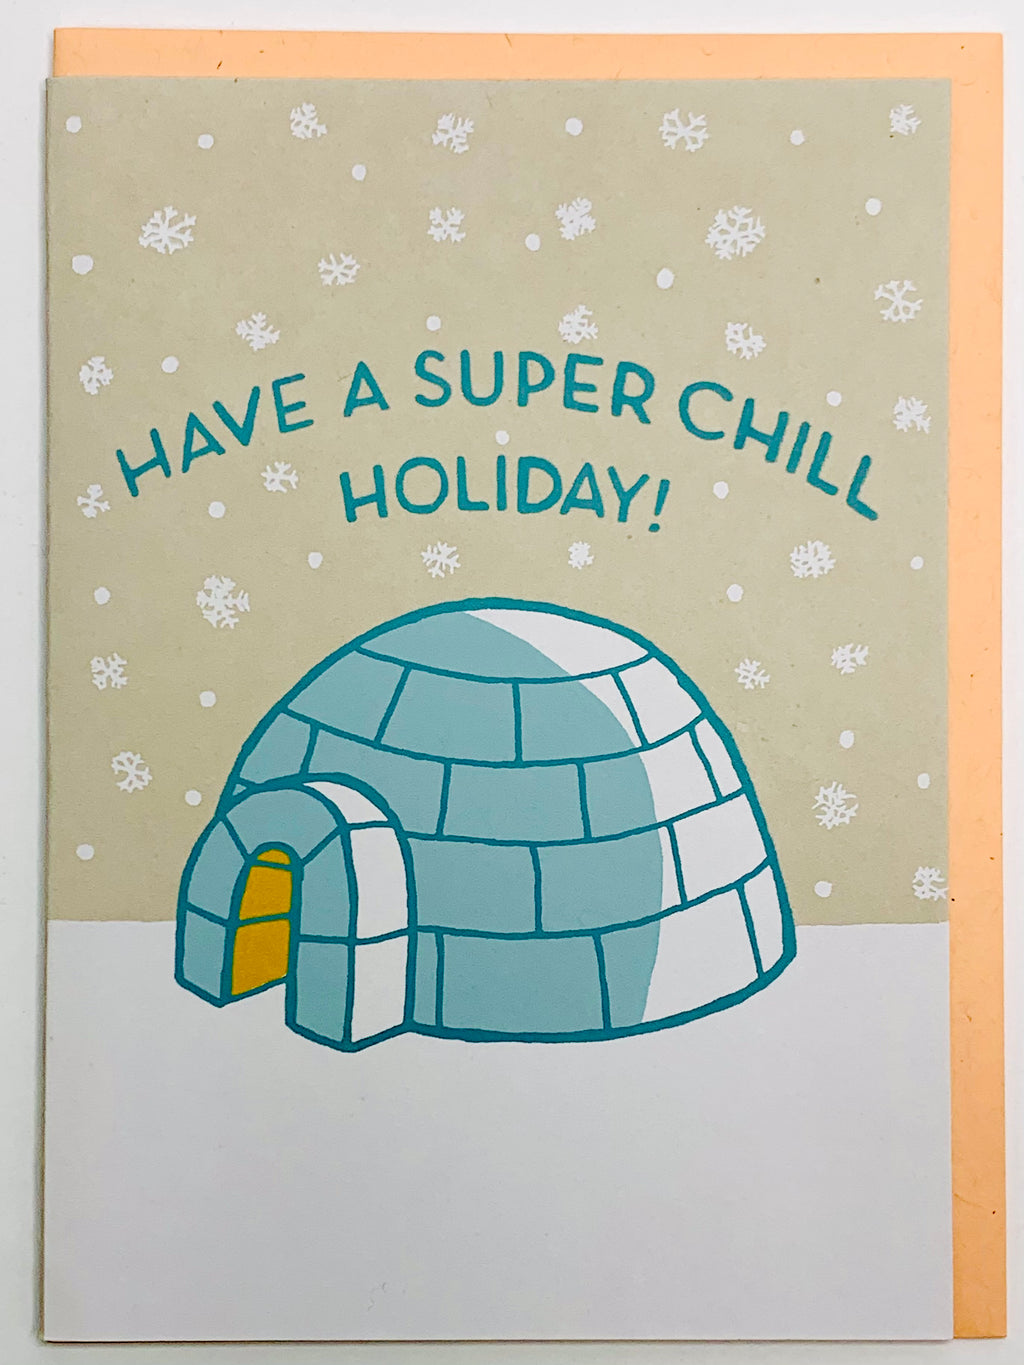 Super Chill Holiday Card